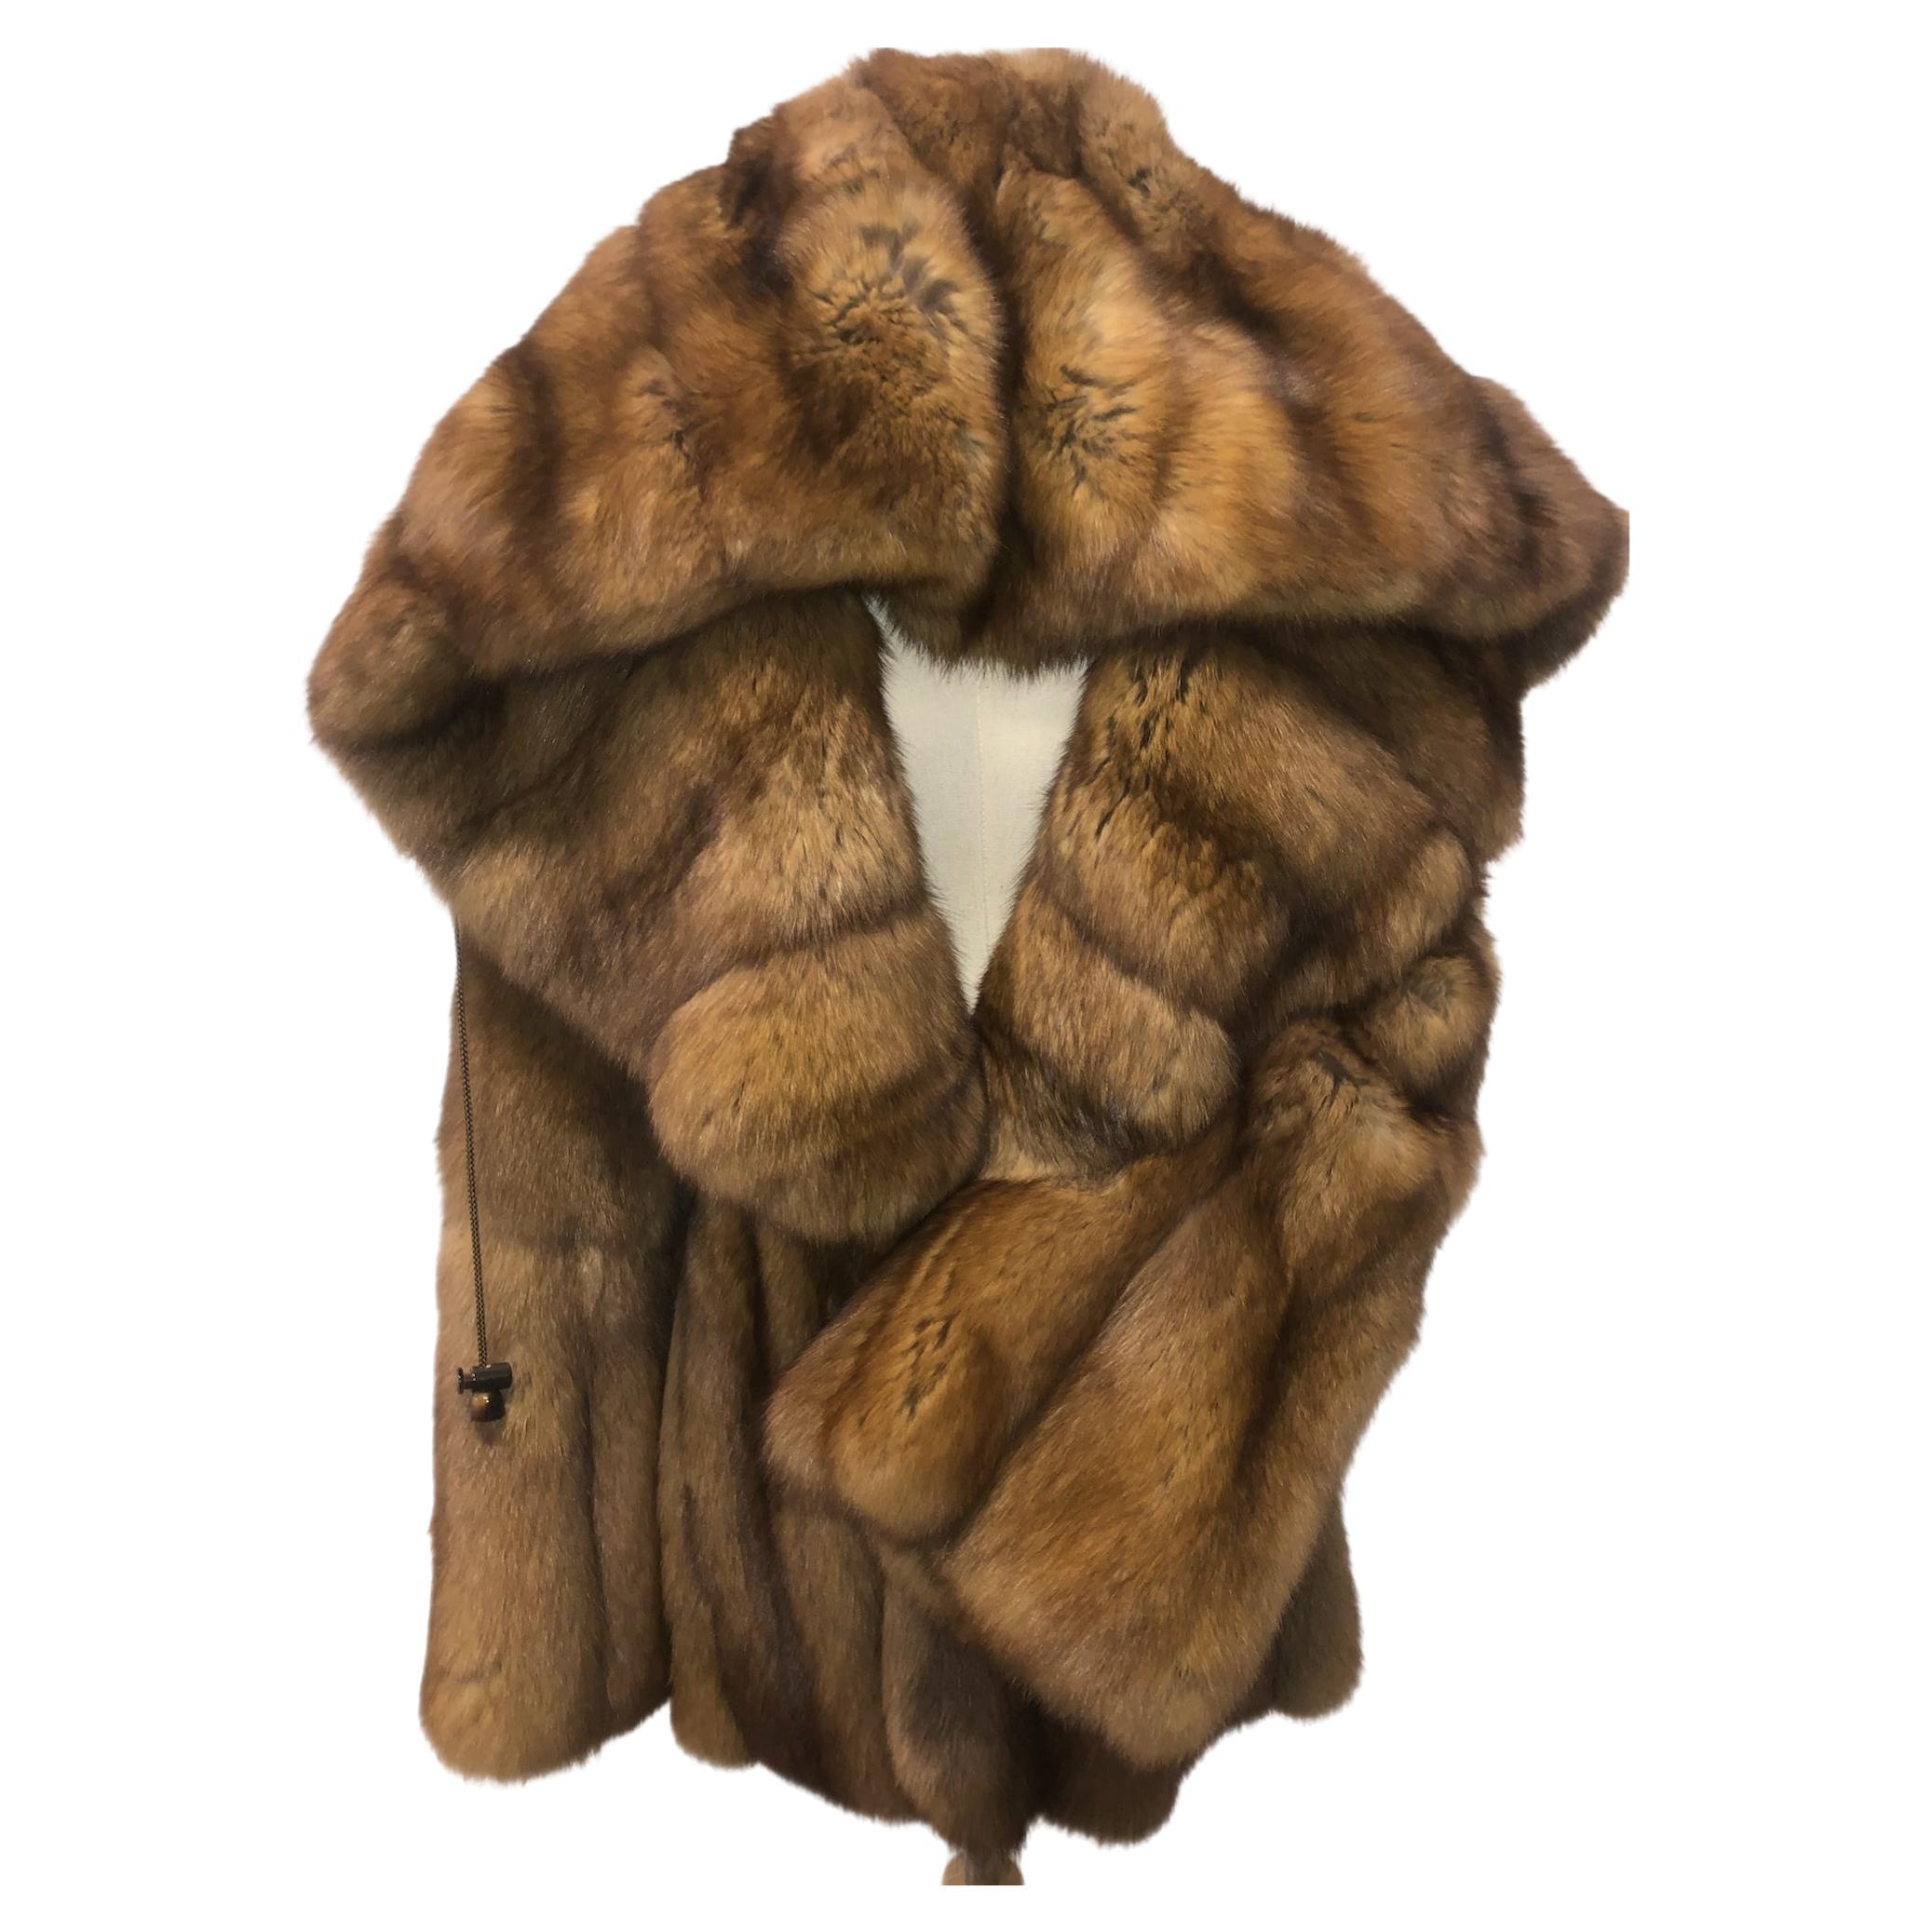 Bisang Russian Sable fur coat size 14-16 tags 65000$ For Sale